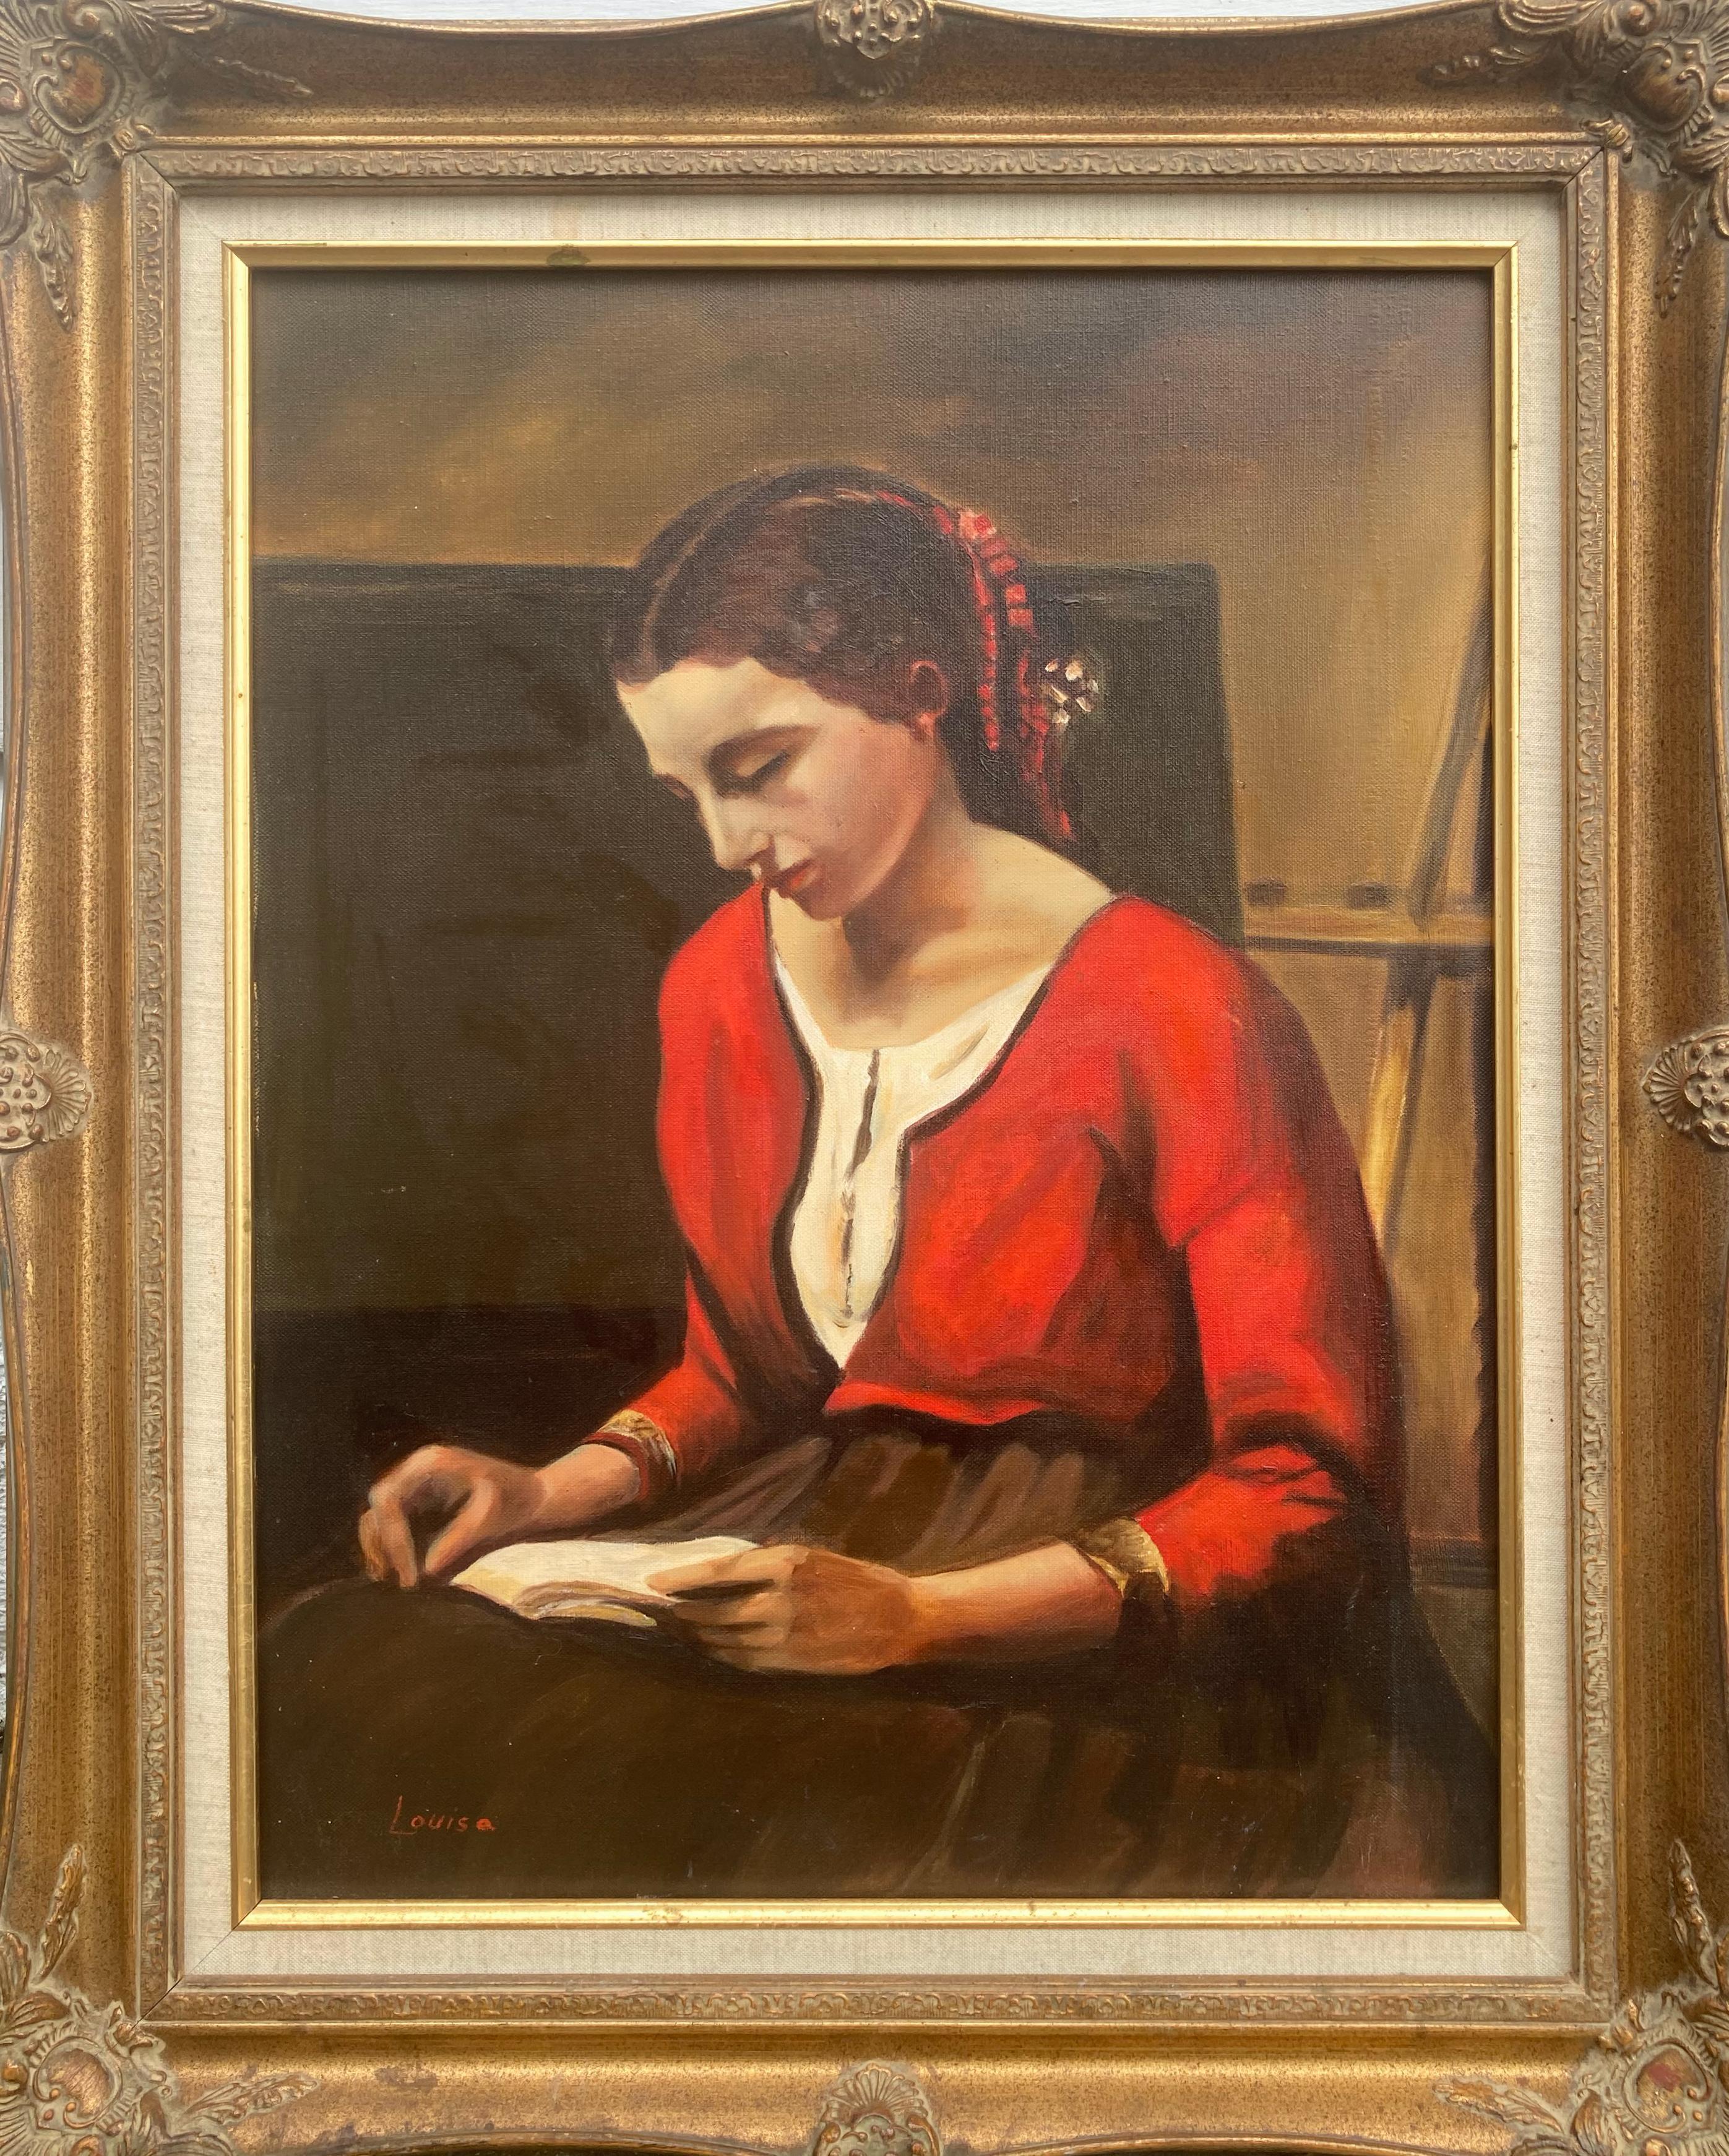 Unknown Figurative Painting - Young Woman Reading (Late 20th Century Modernist Framed Portrait Painting)